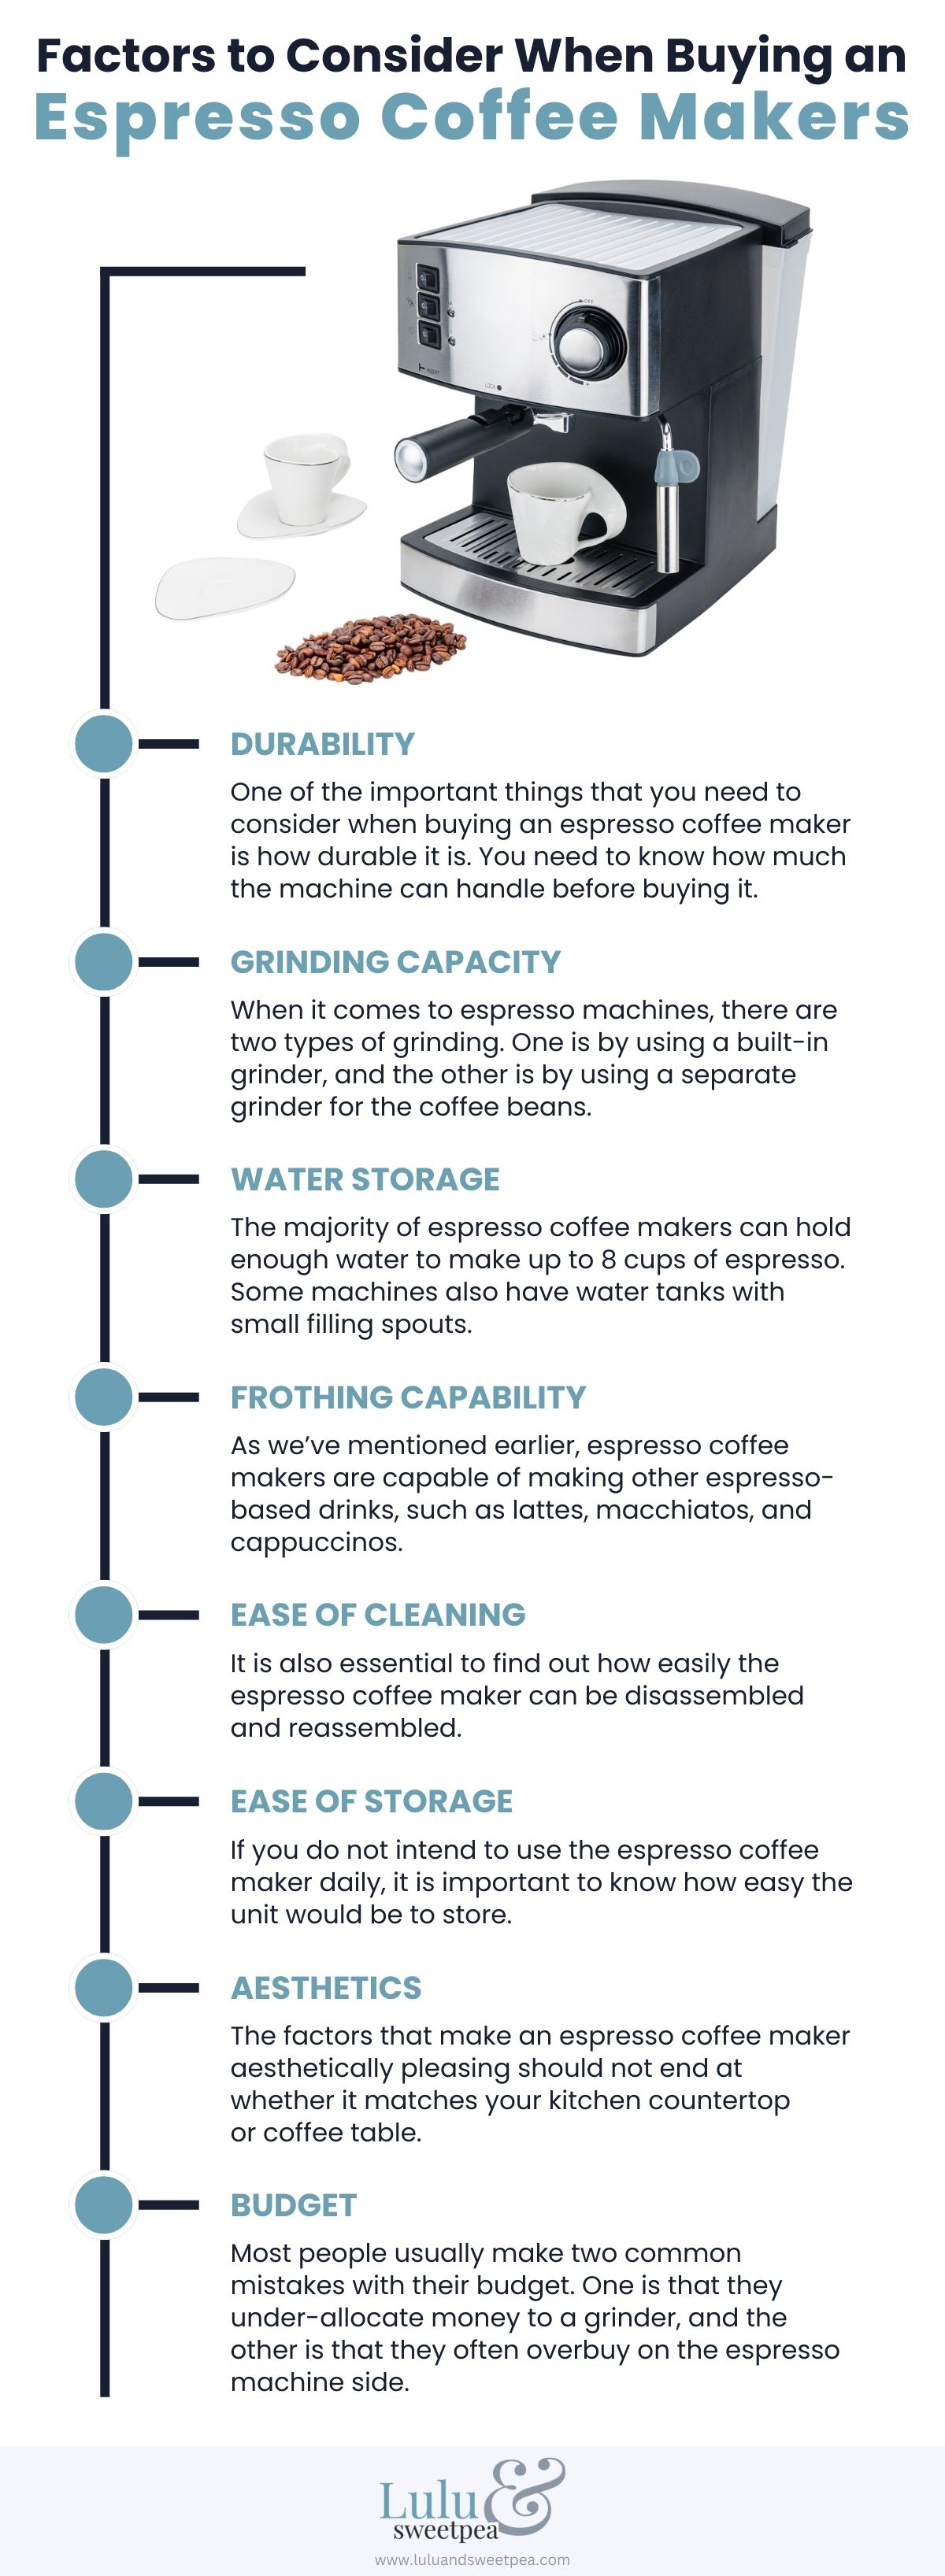 Factors-to-Consider-When-Buying-an-Espresso-Coffee-Maker